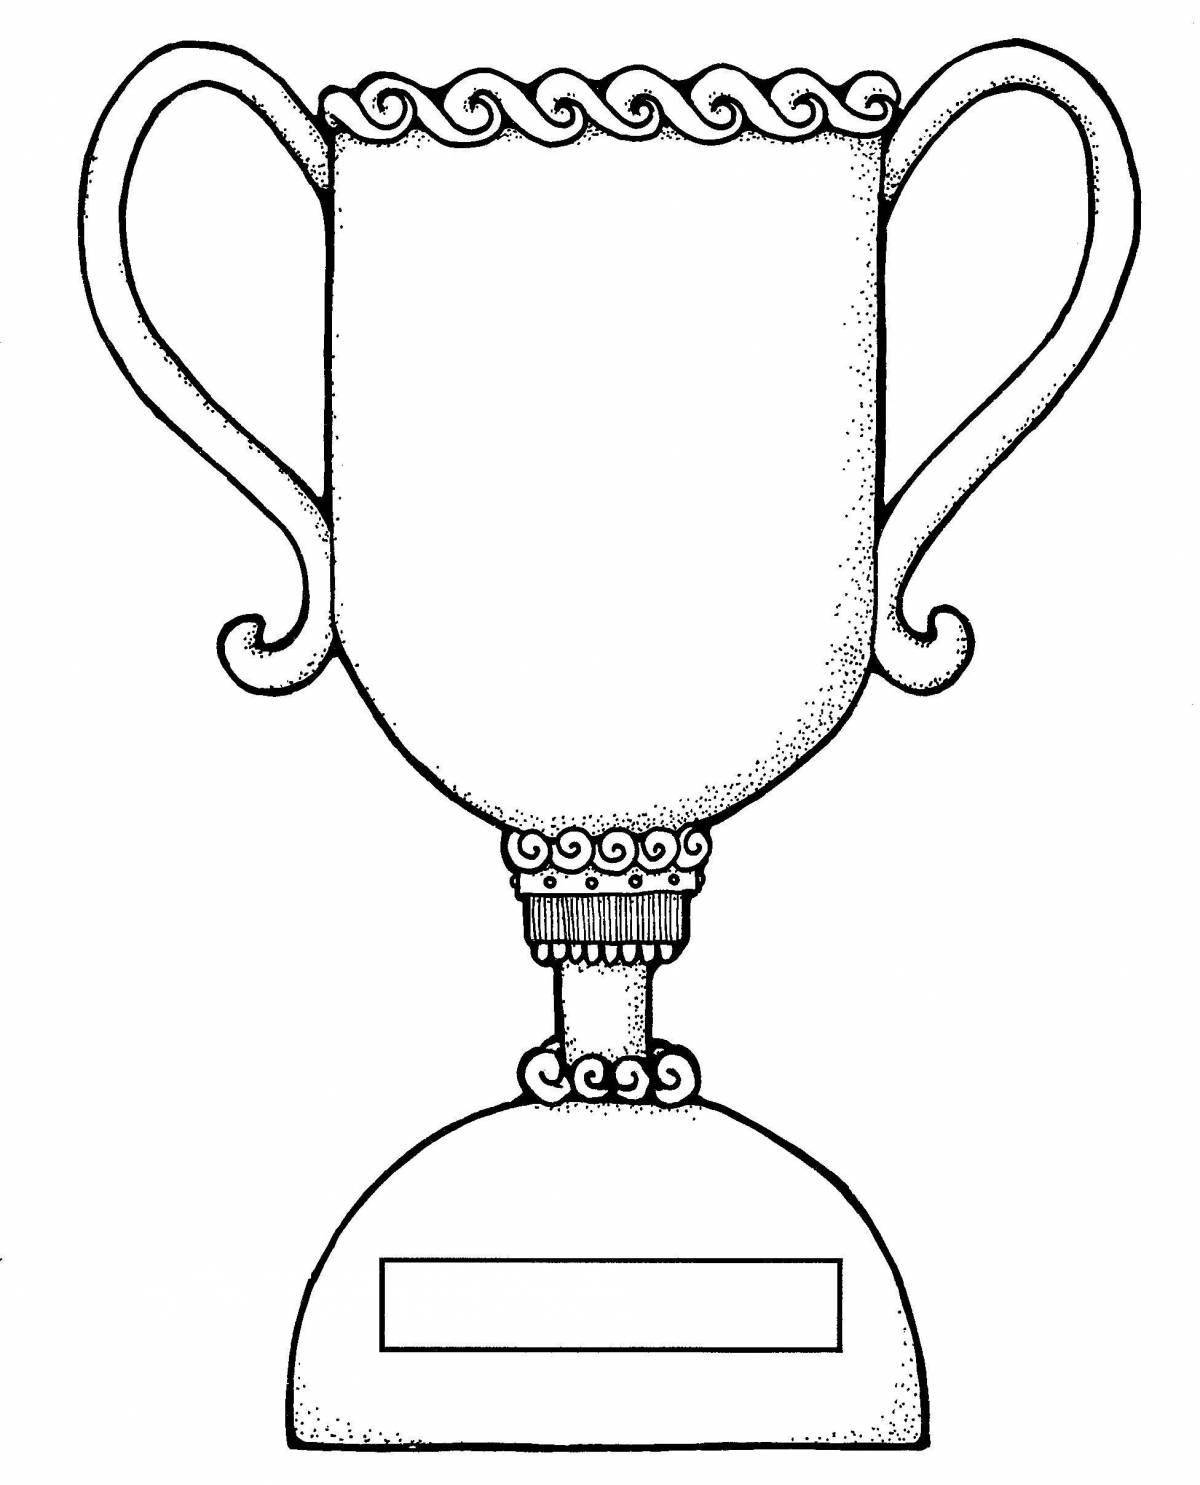 Blessed bowl coloring page